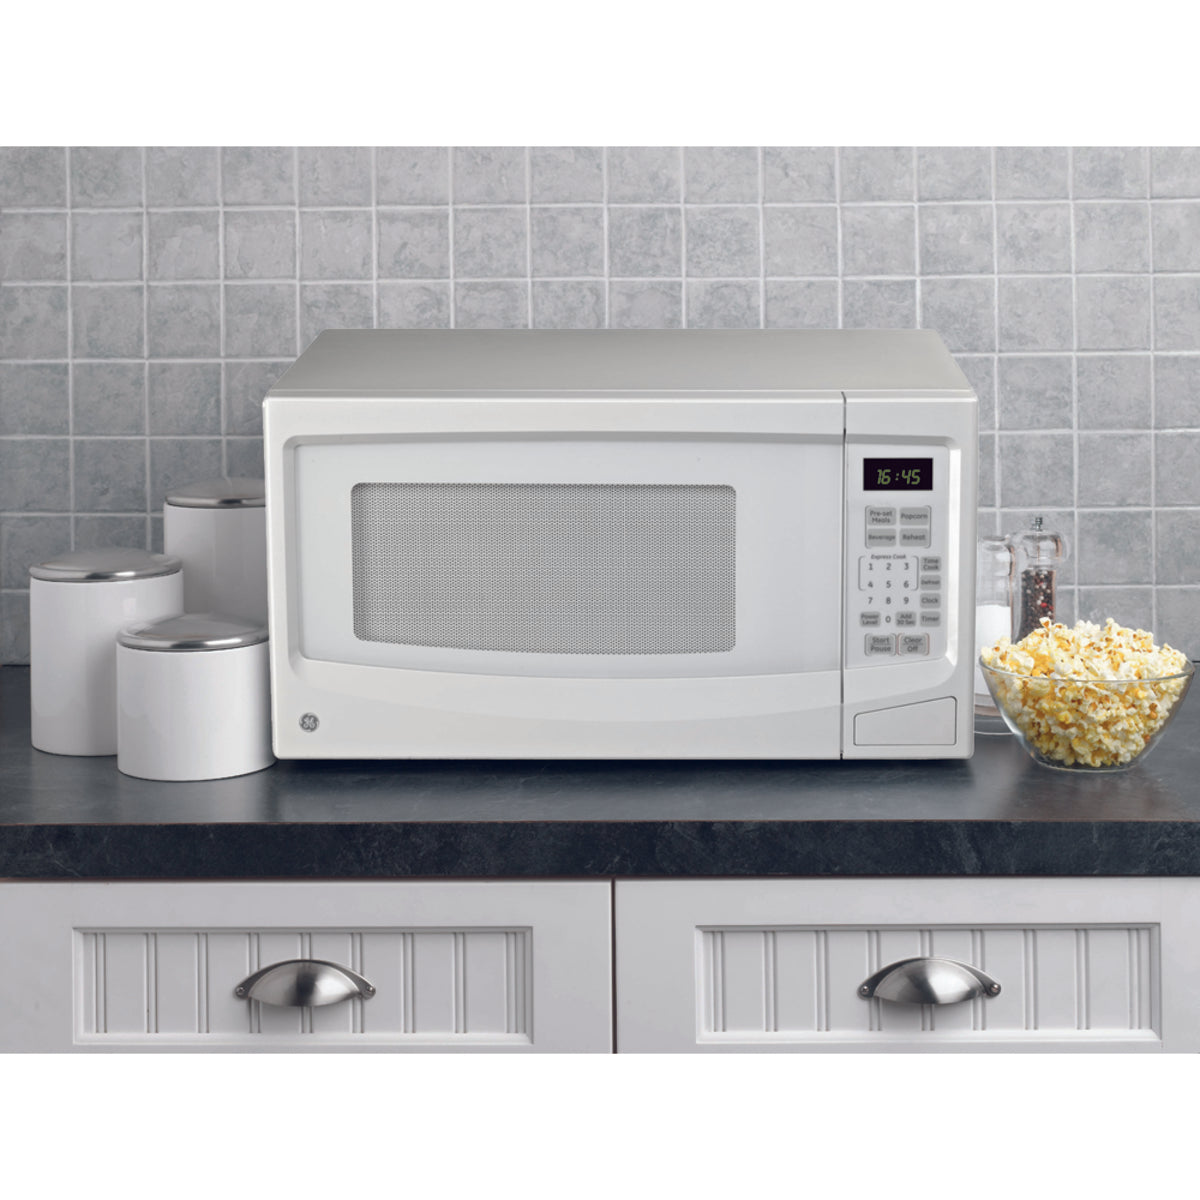 GE - 1.1 cu. Ft  Counter top Microwave in White - JES1145WTC